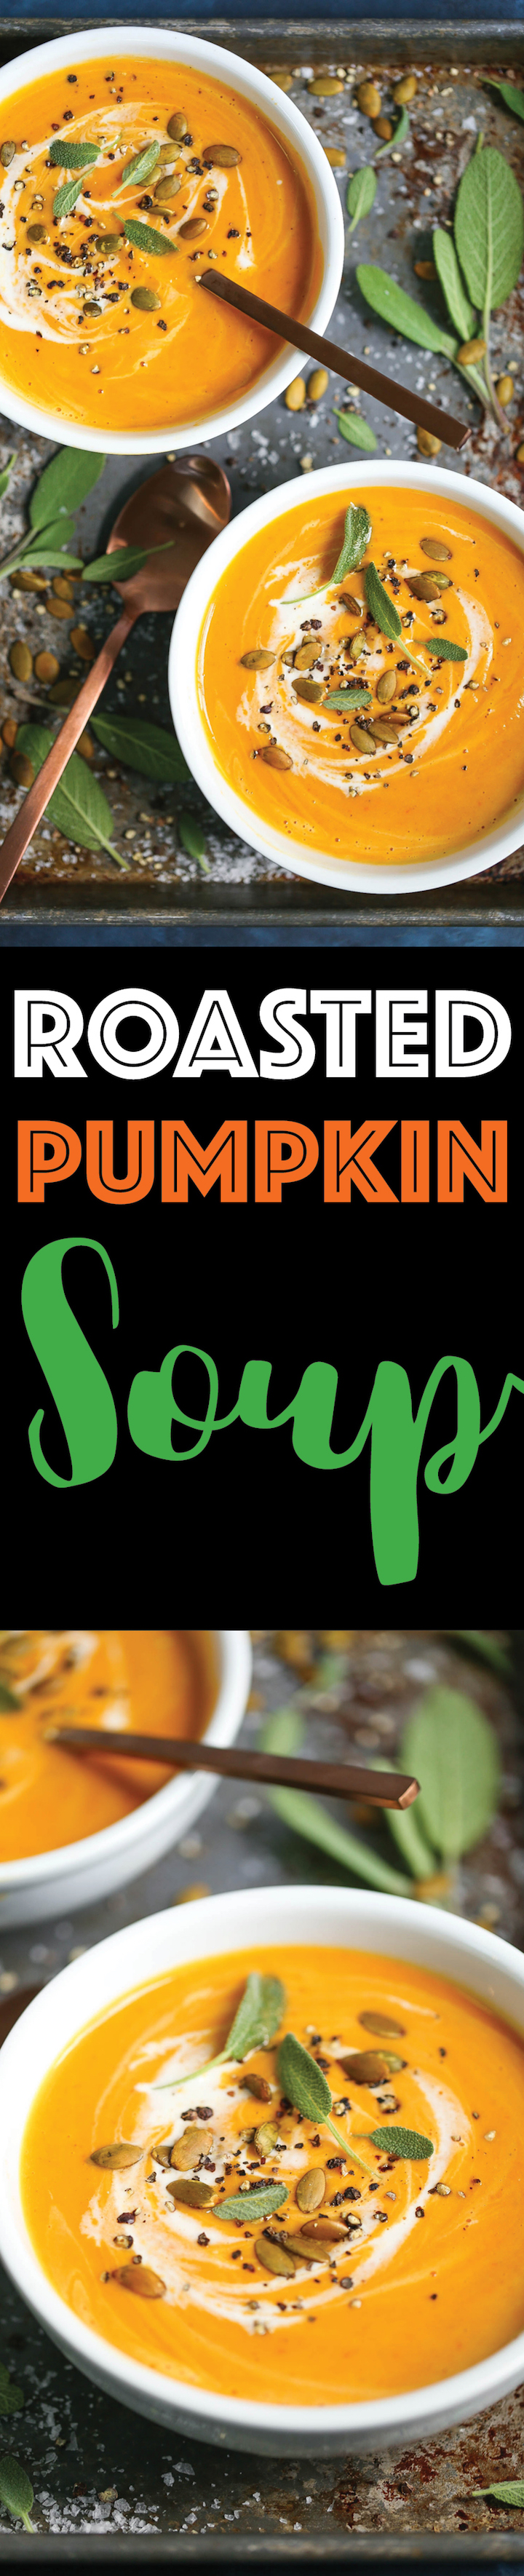 Roasted Pumpkin Soup - My favorite Fall and Winter soup! You'll really want it all year long. And you can also substitute the pumpkin with butternut squash!